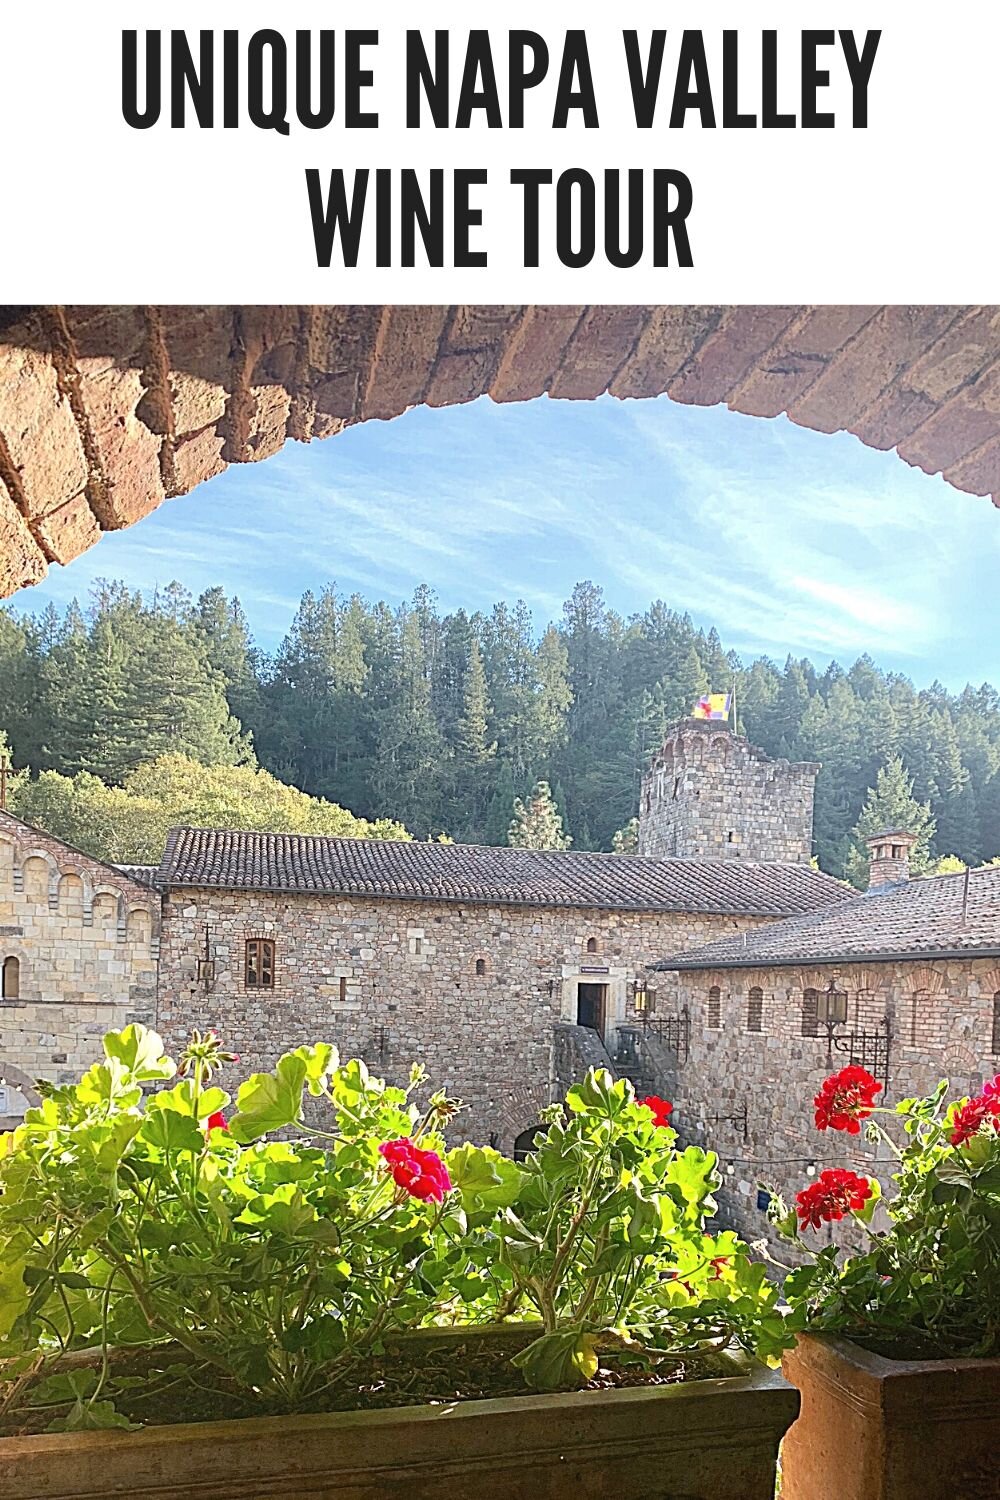 These are, hands down, one of the Best San Francisco Wine Tours on the market! From wine and cheese in Napa Valley to culture in the city, these have it all! Highly recommend Extranomical tours for any wine country, napa valley or sonoma tours from …